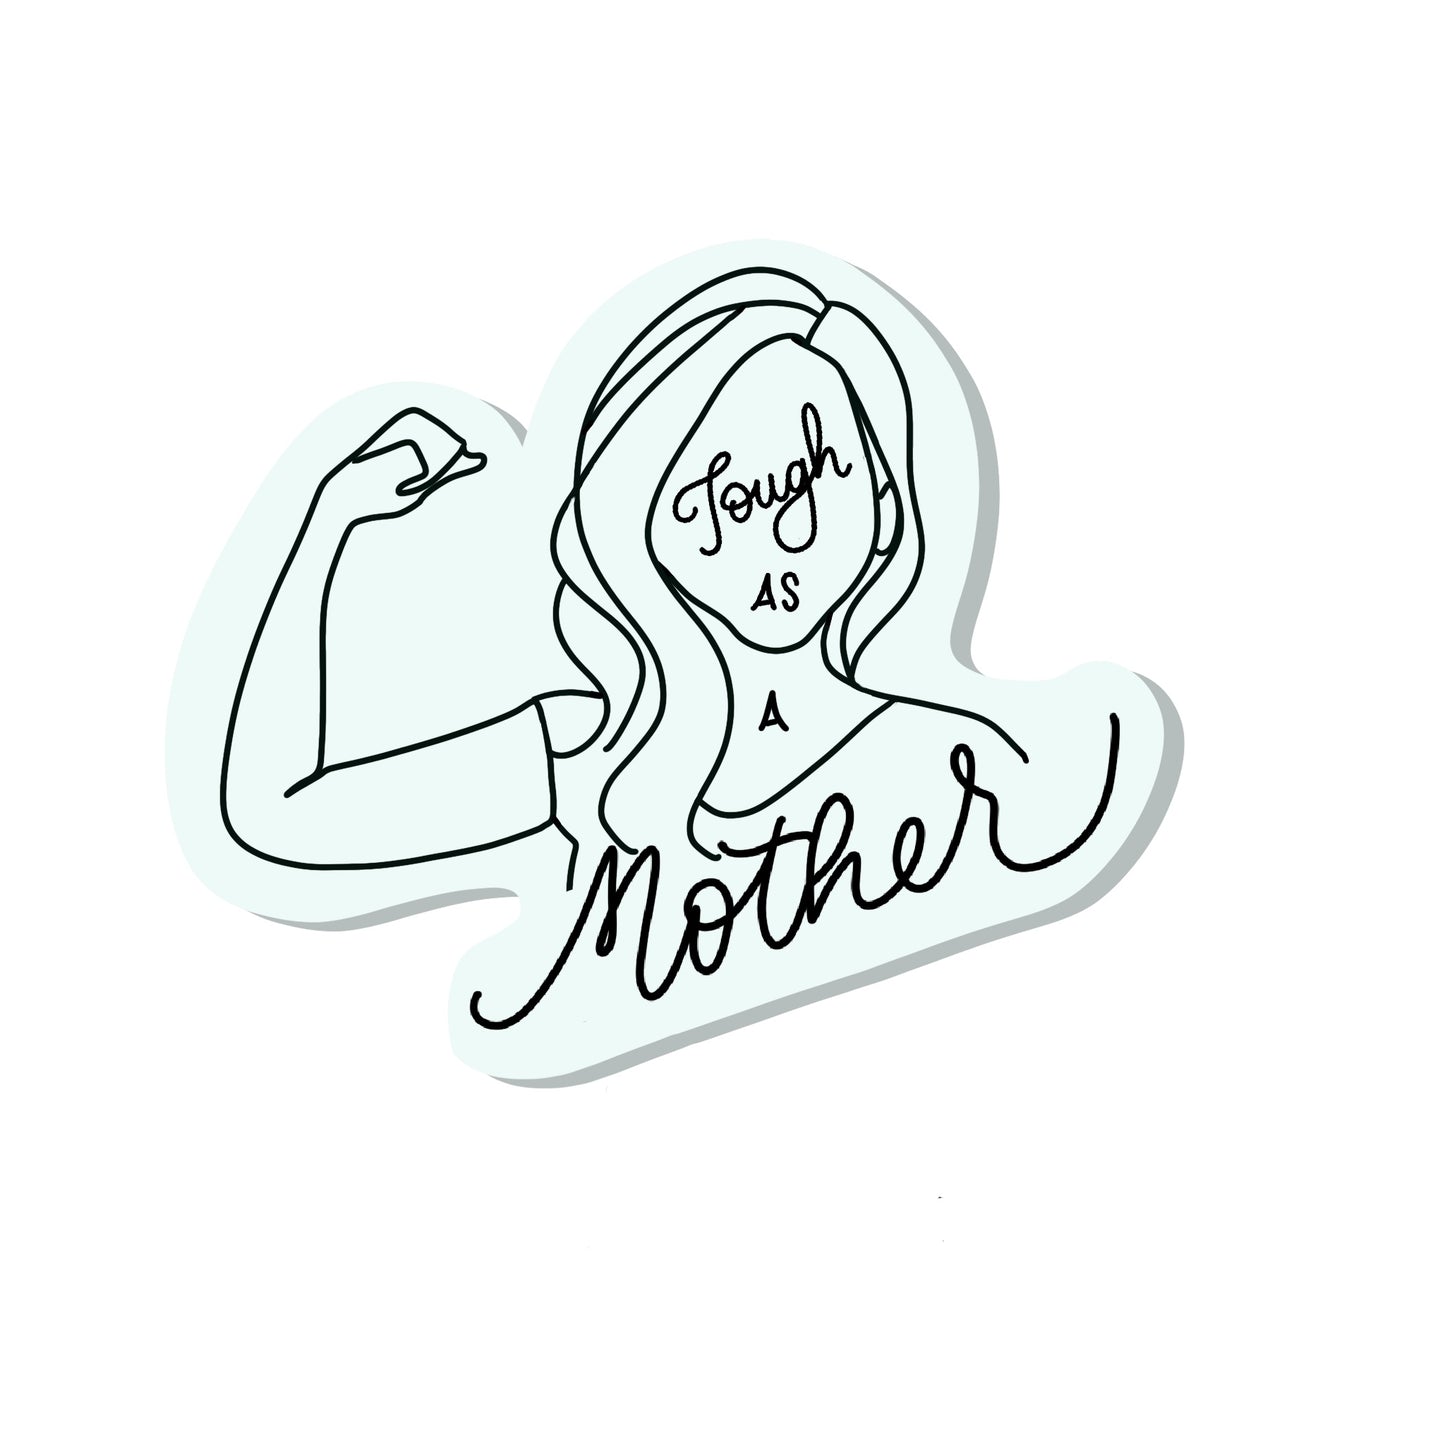 Tough as a mother sticker, Mother’s Day sticker, moms are tough sticker.